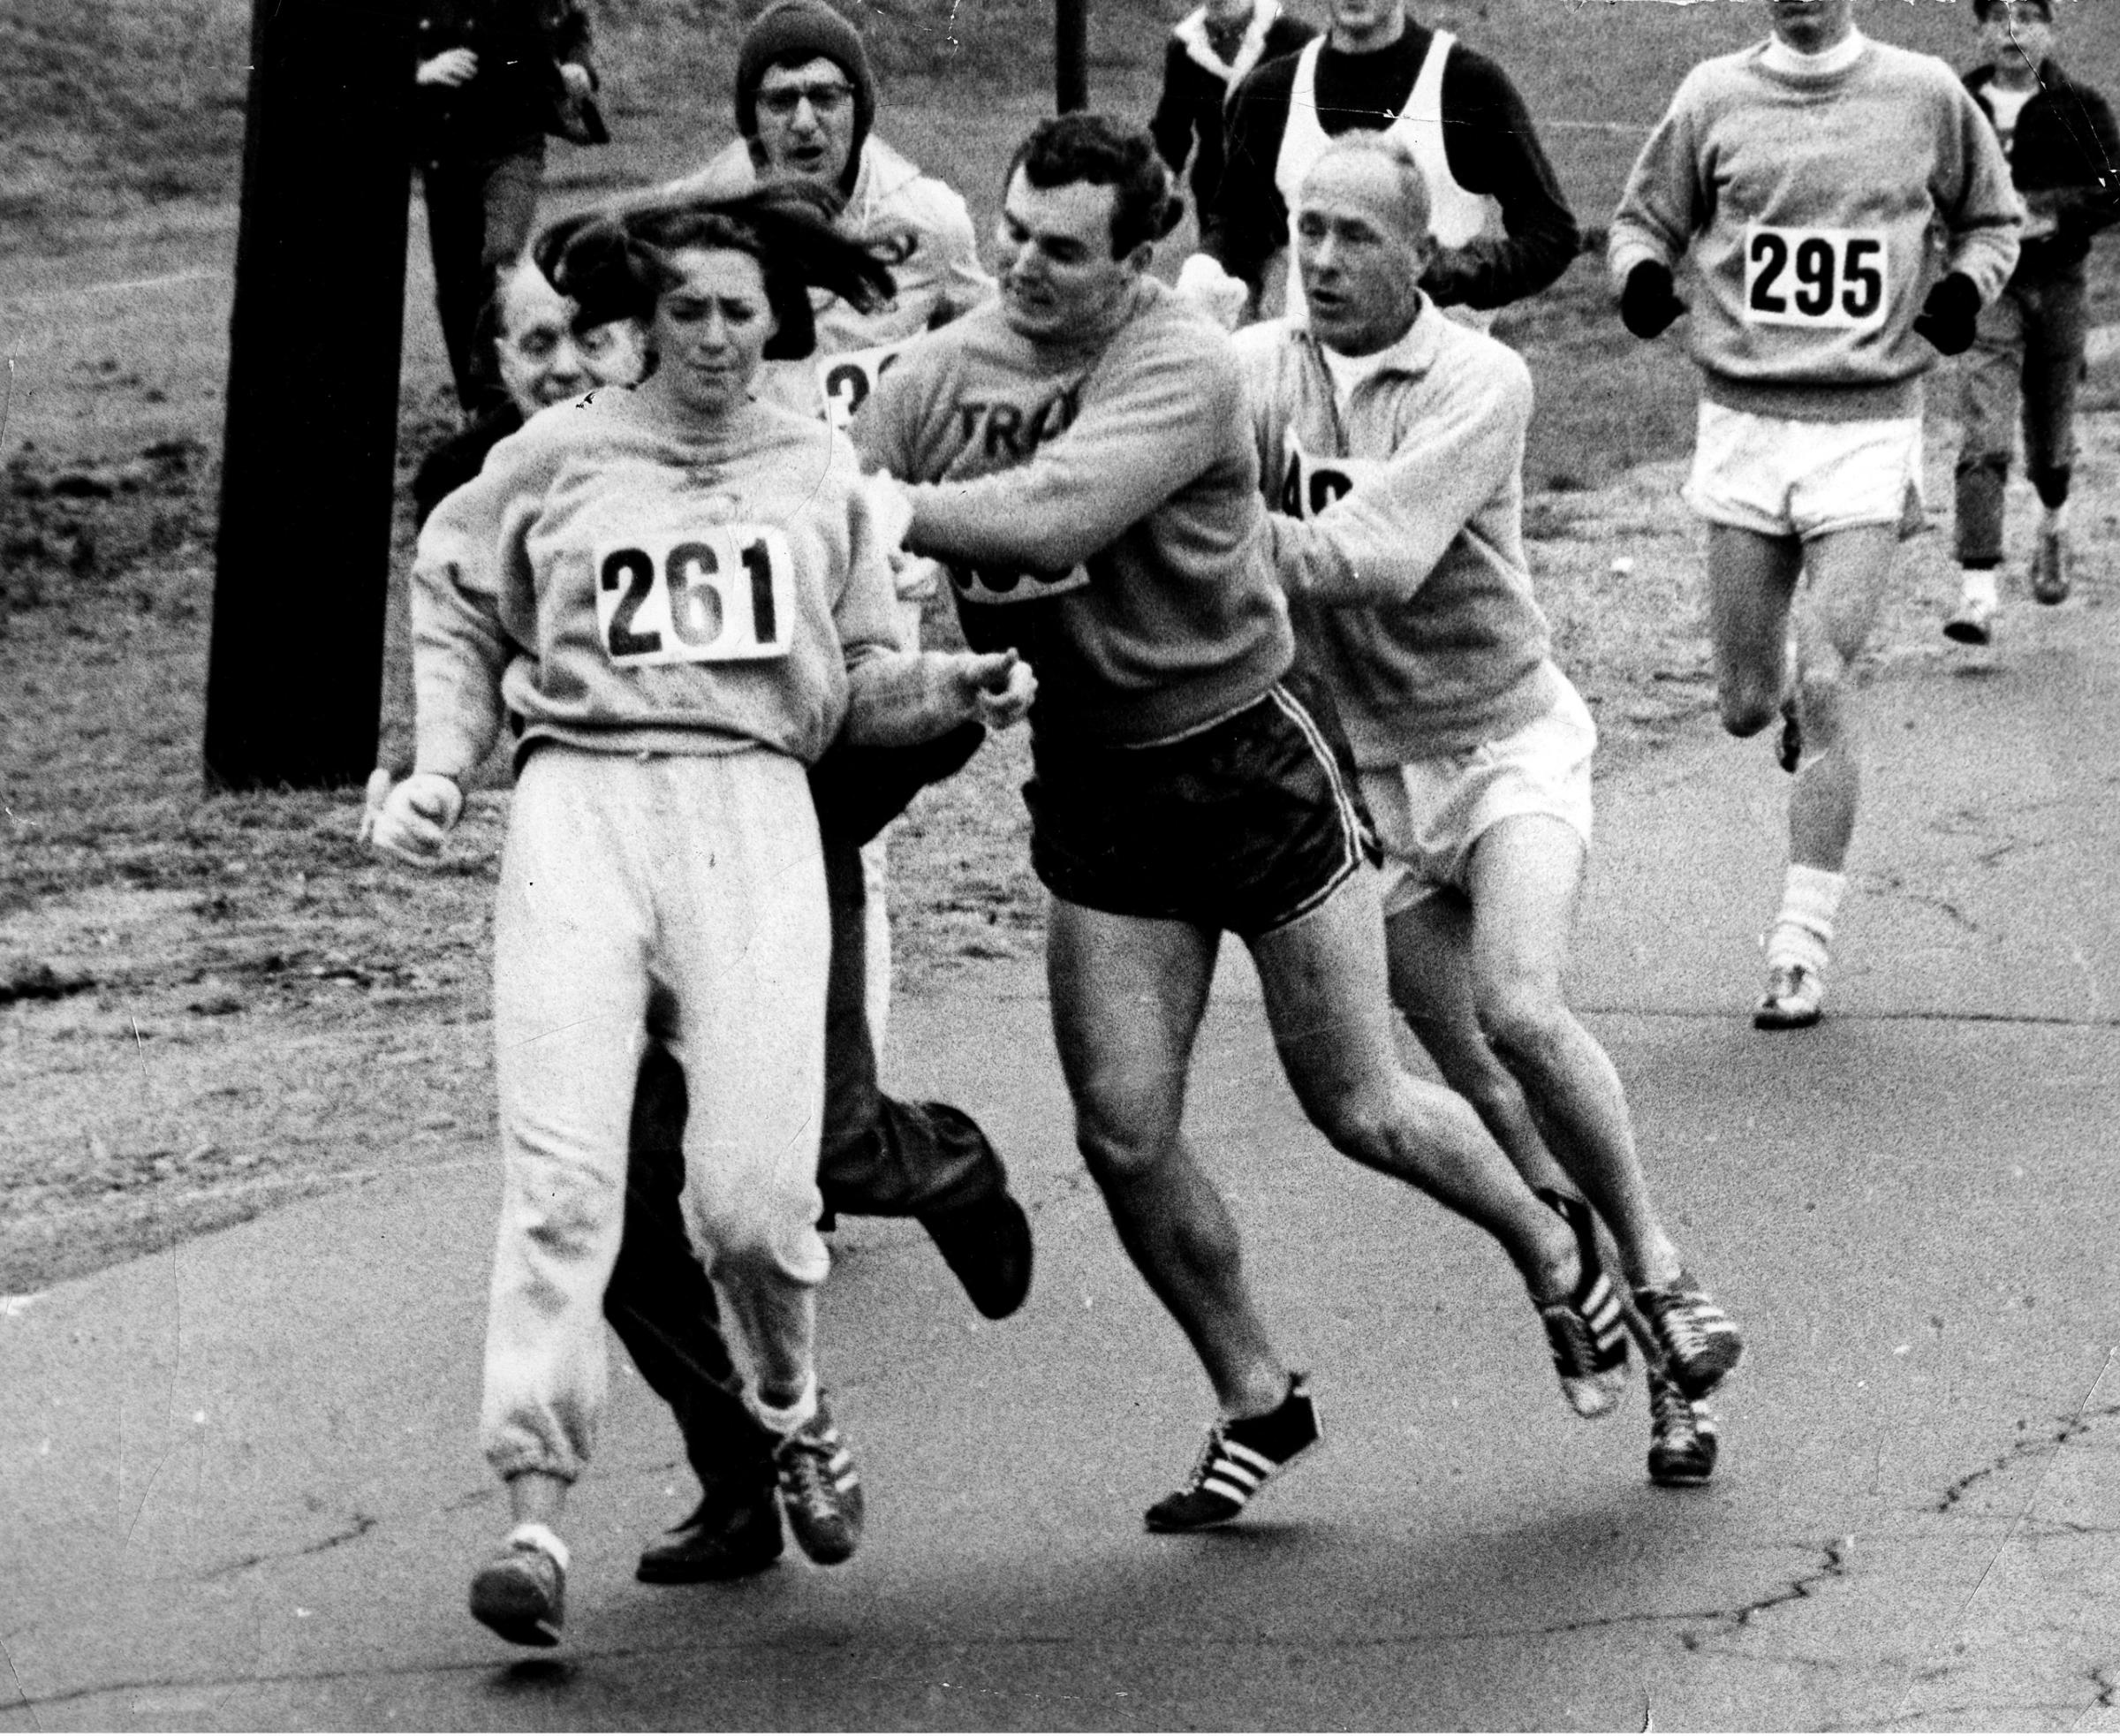 Kathy Switzer roughed up by Jock Semple during Boston Mararthon, April 19, 1967.